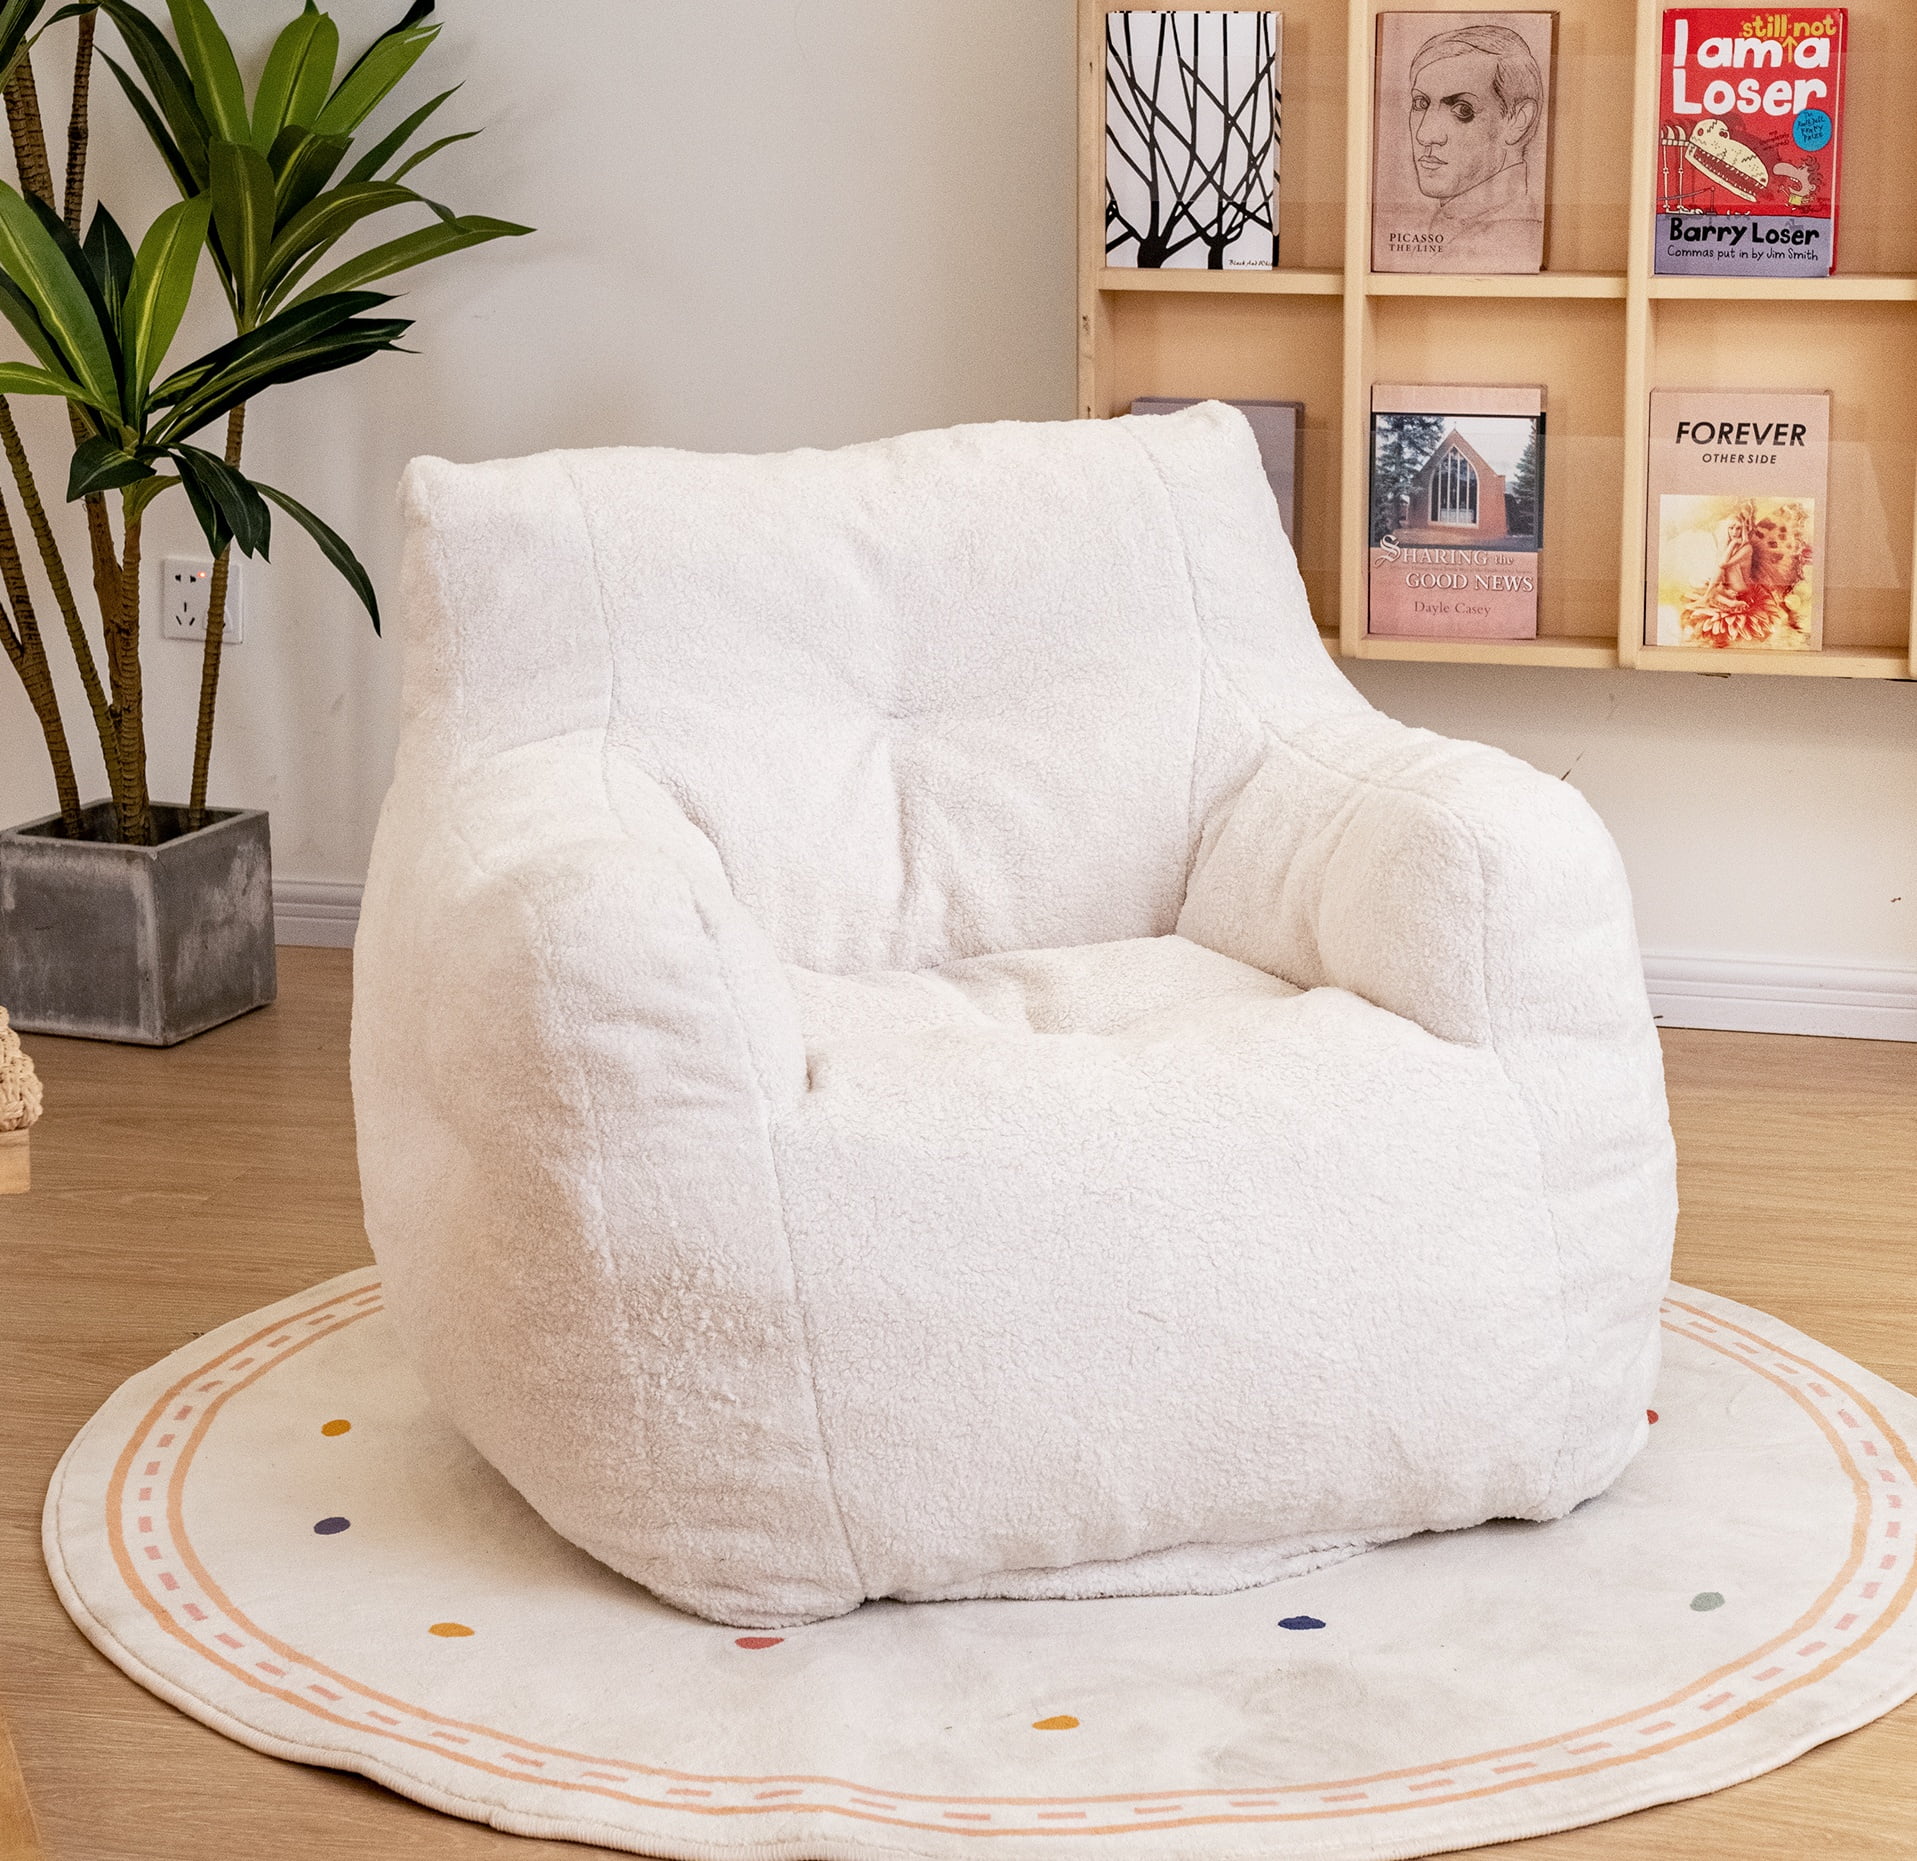 Amazon.com: Lukery Bean Bag Chair for Adults (No Filler), Minimalism Bean  Bag Cover, Stuffed Animal Storage Bean Bag Chairs for Kids, 3D Comfy Bean  Bags Cotton Beanbag Lazy Sofa (Totem,M/31.5x35.4'') : Home